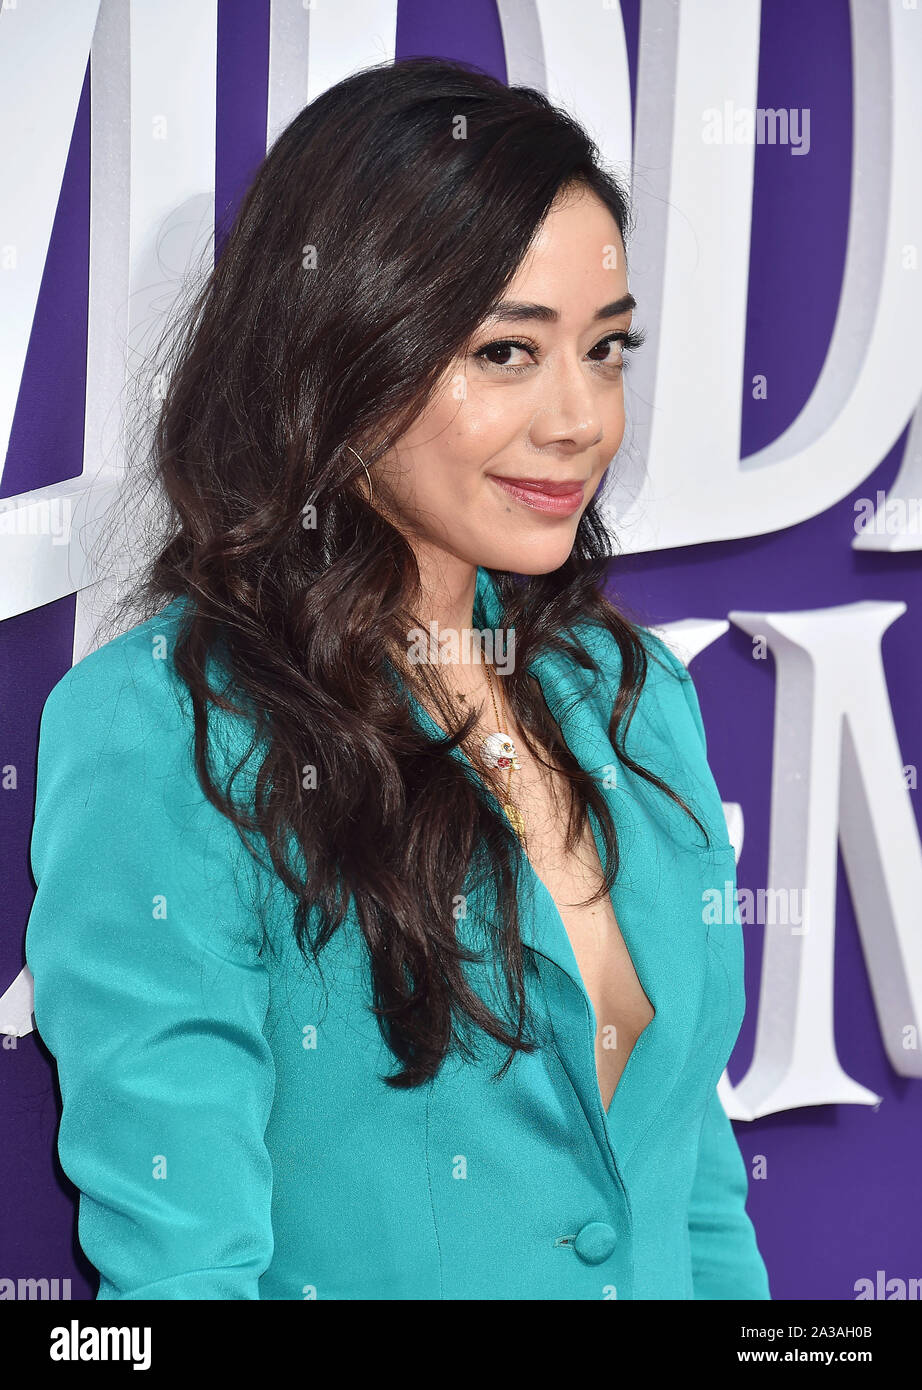 CENTURY CITY, CA - OCTOBER 06: Aimee Garcia attends the Premiere of MGM's 'The Addams Family' at Westfield Century City AMC on October 06, 2019 in Los Angeles, California. Stock Photo